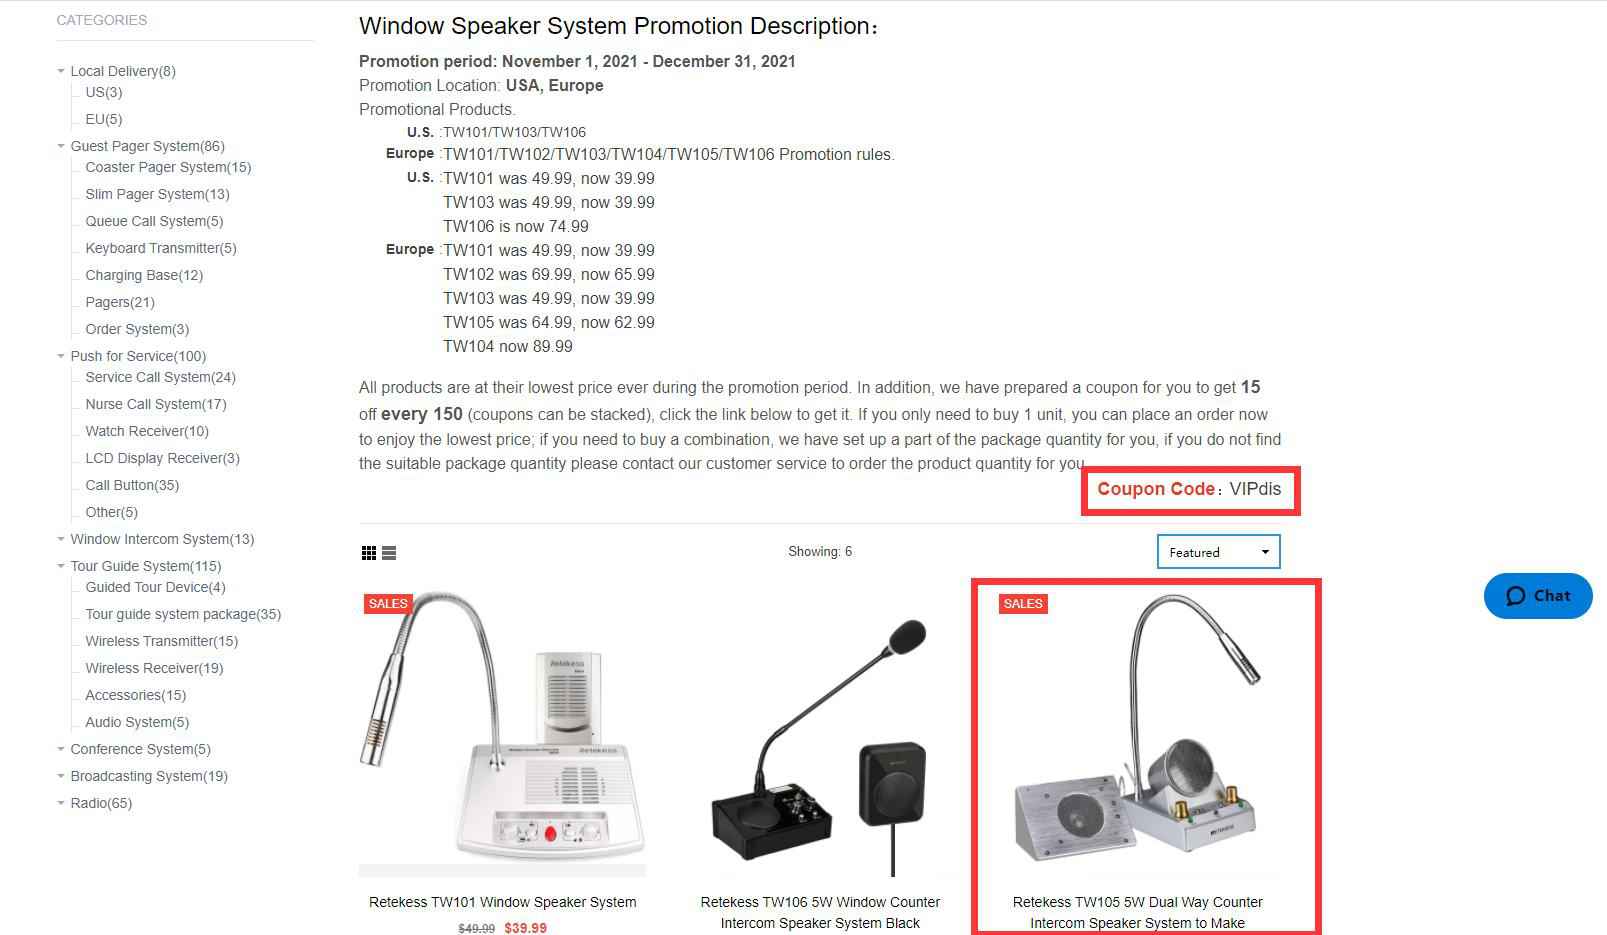 The second step of the operation of window intercom promotion